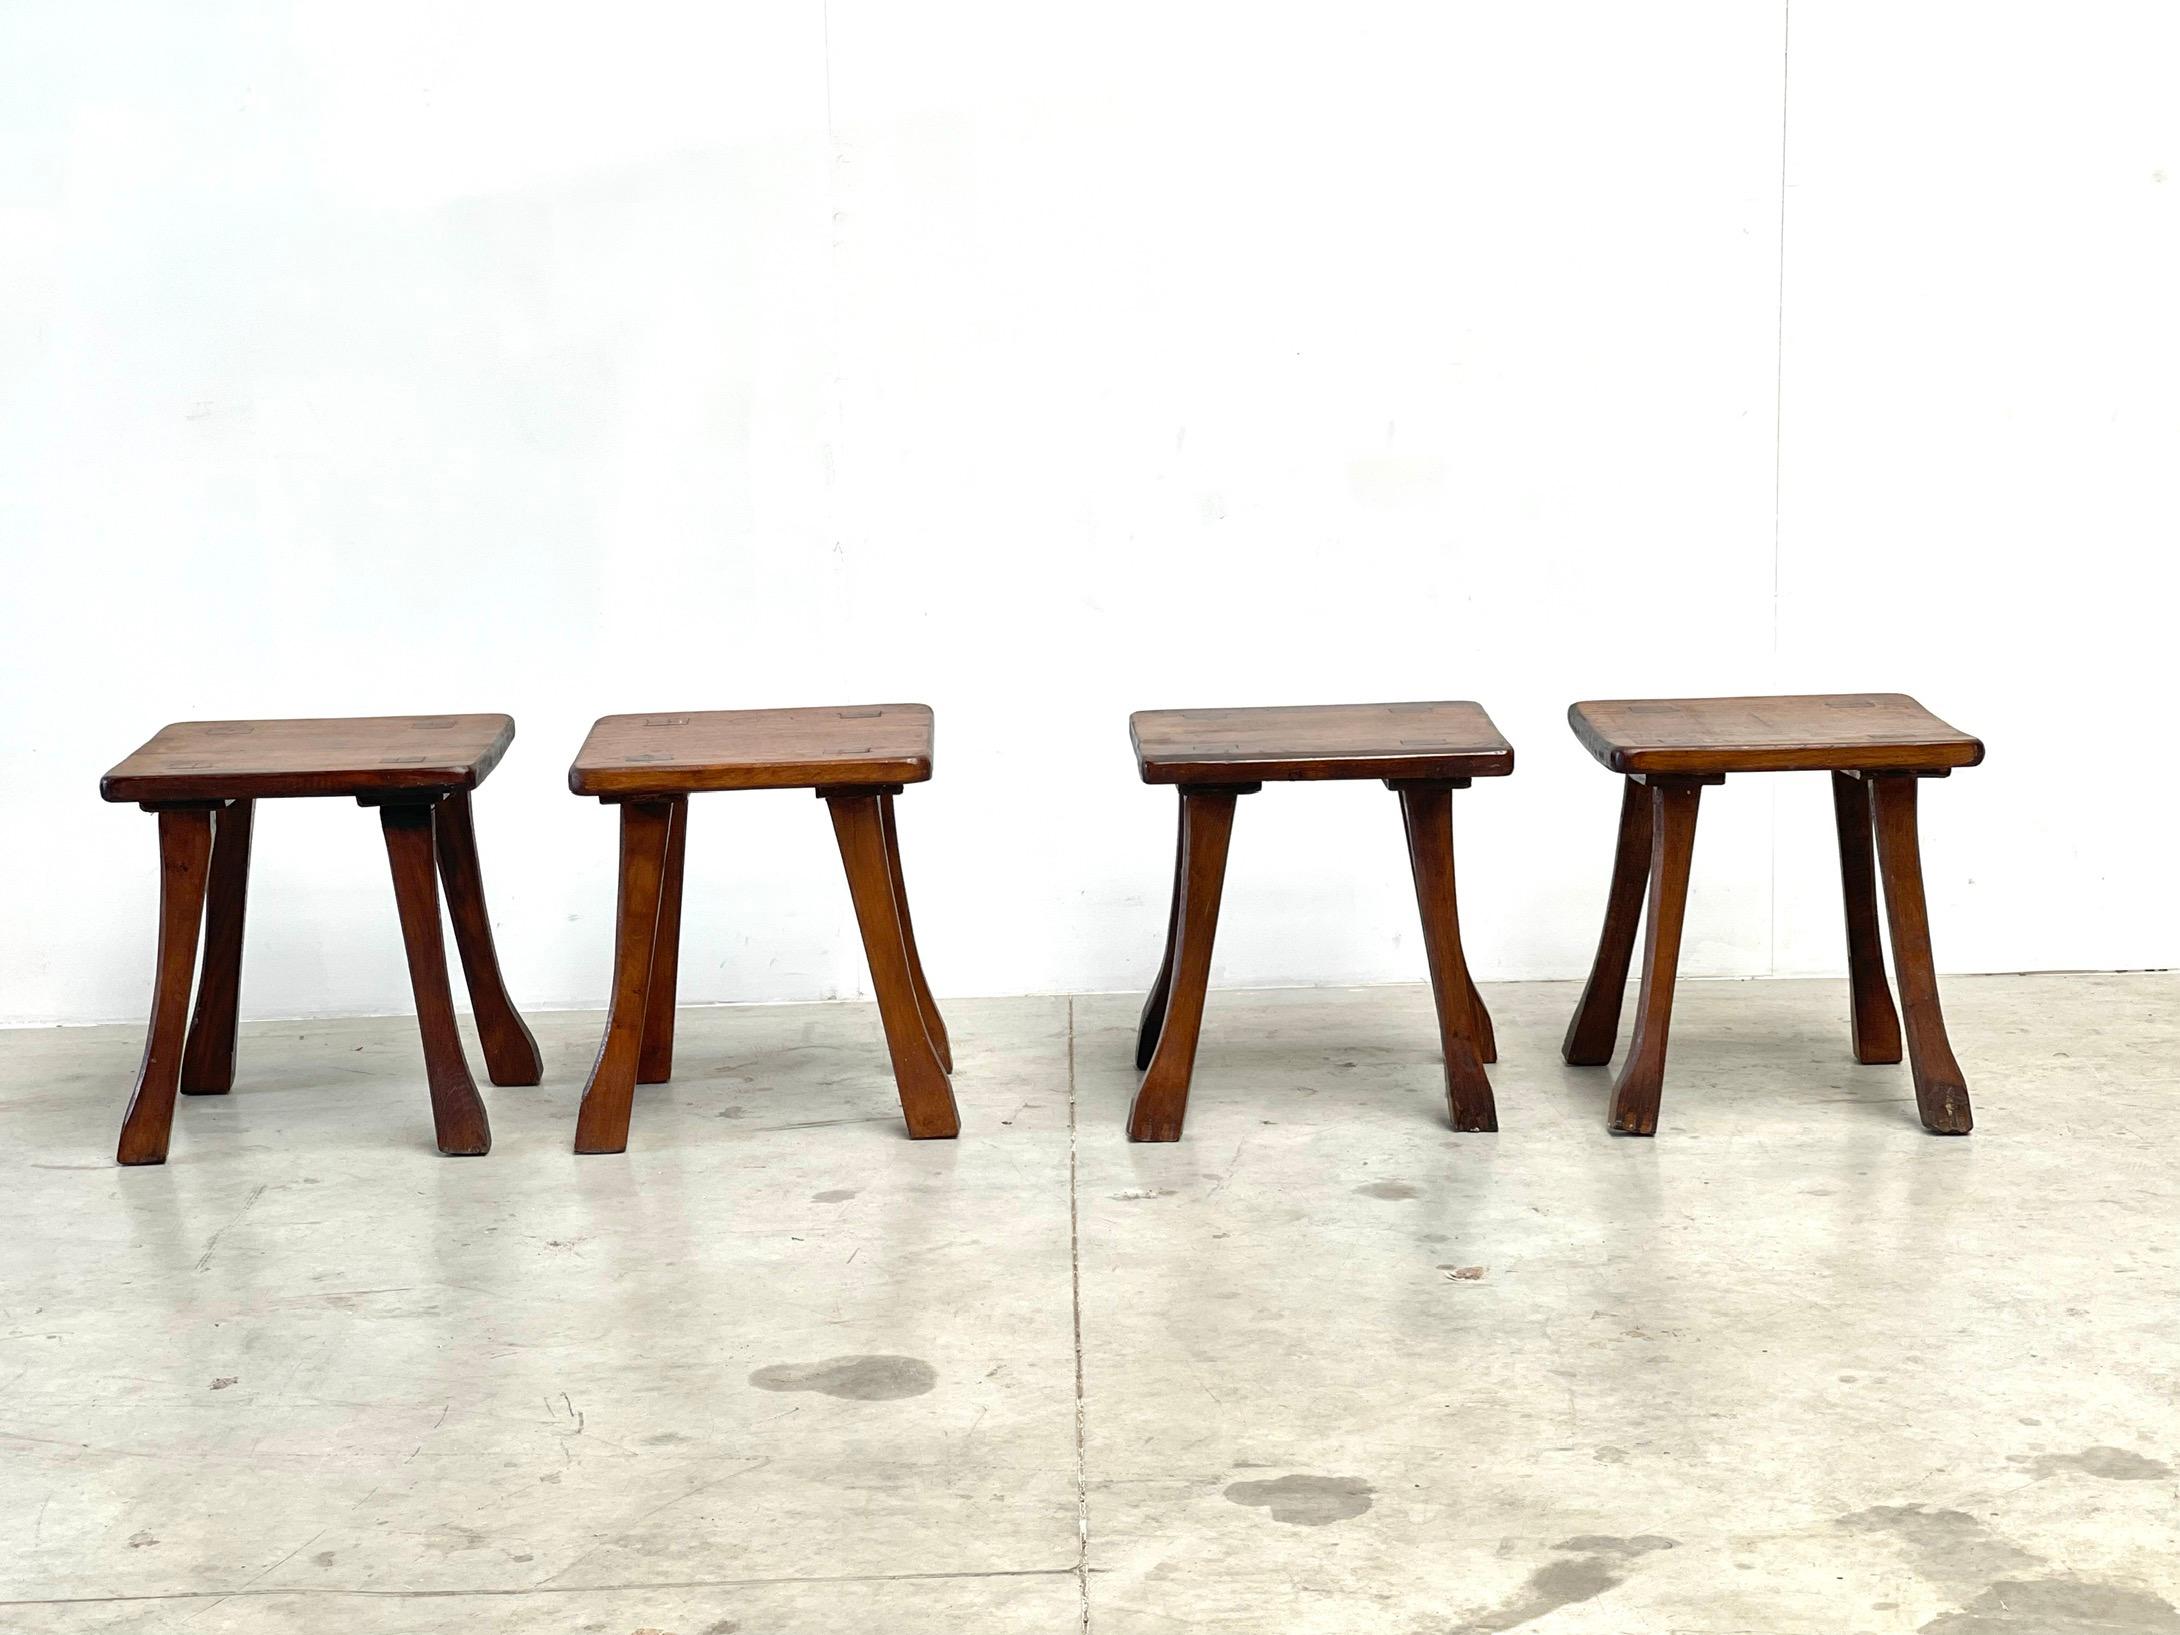 These kind of furniture is becoming more popular. This is also understood as brutalist or farmer furniture. This is a set of tables that comes from France. The set was probably handmade in the 1970s by a local carpenter. they are made of wood from